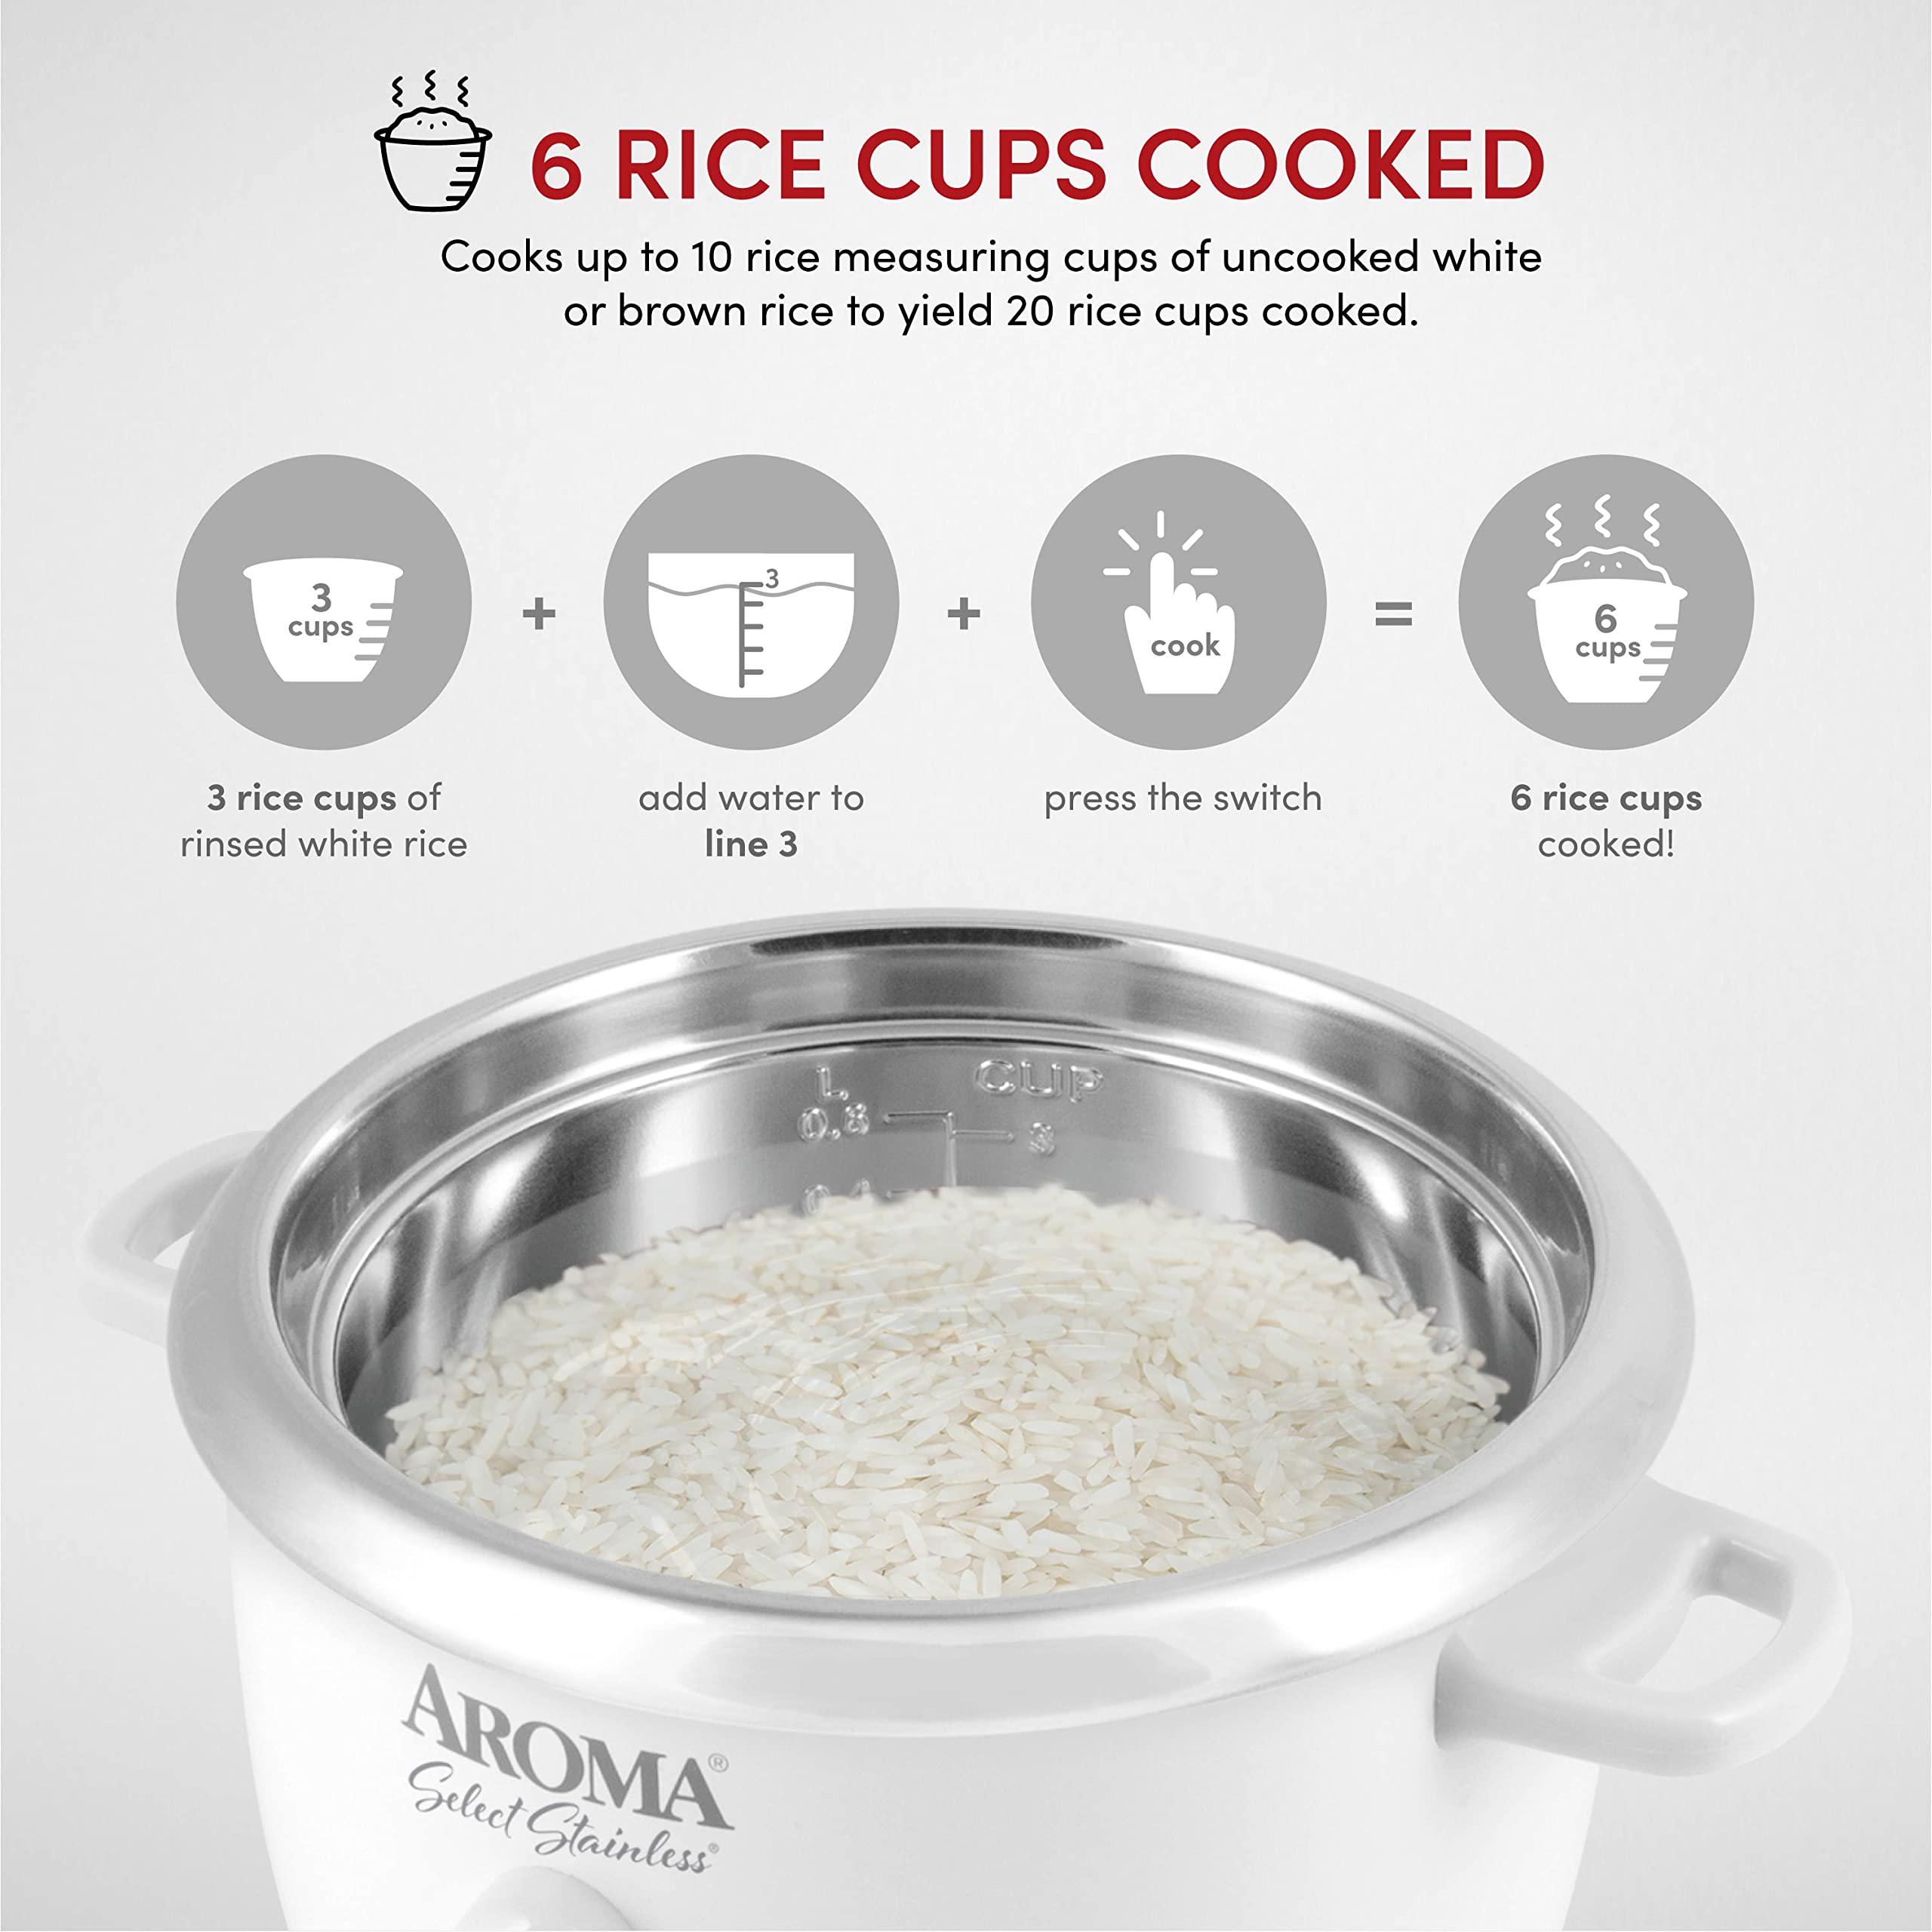 Aroma Housewares Select Stainless Rice Cooker & Warmer with Uncoated Inner Pot, 6-Cup(cooked) / 1.4Qt, ARC-753SG, White